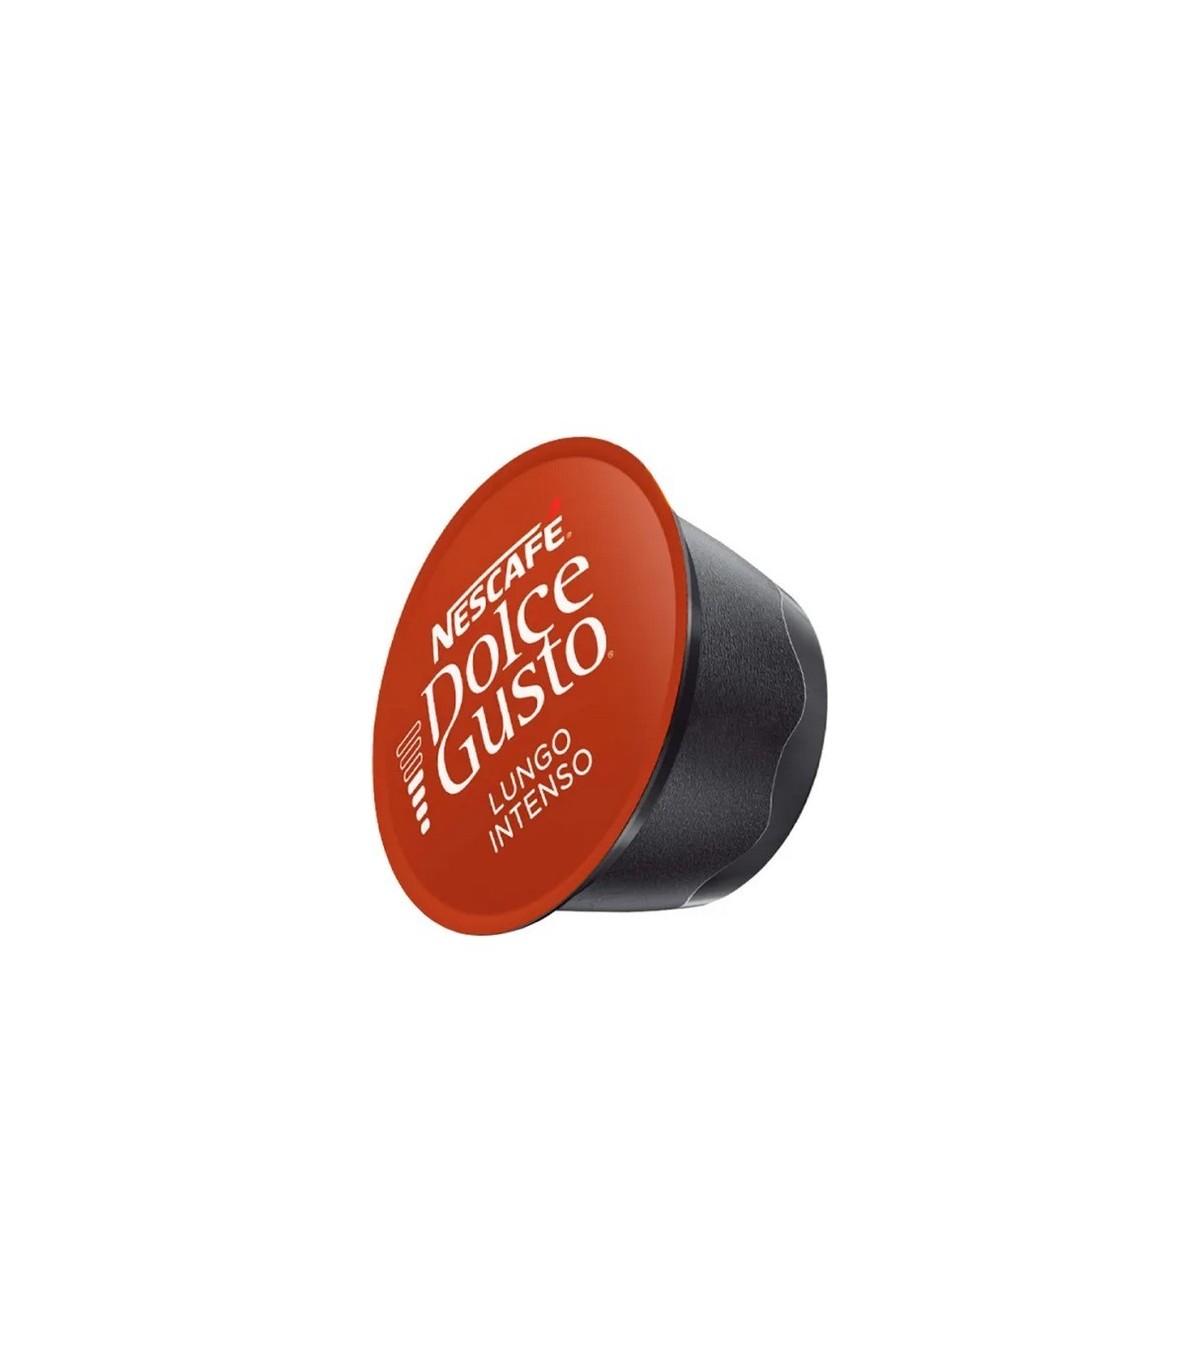 Infusion de fruits rouges: 16 capsules compatibles Dolce Gusto